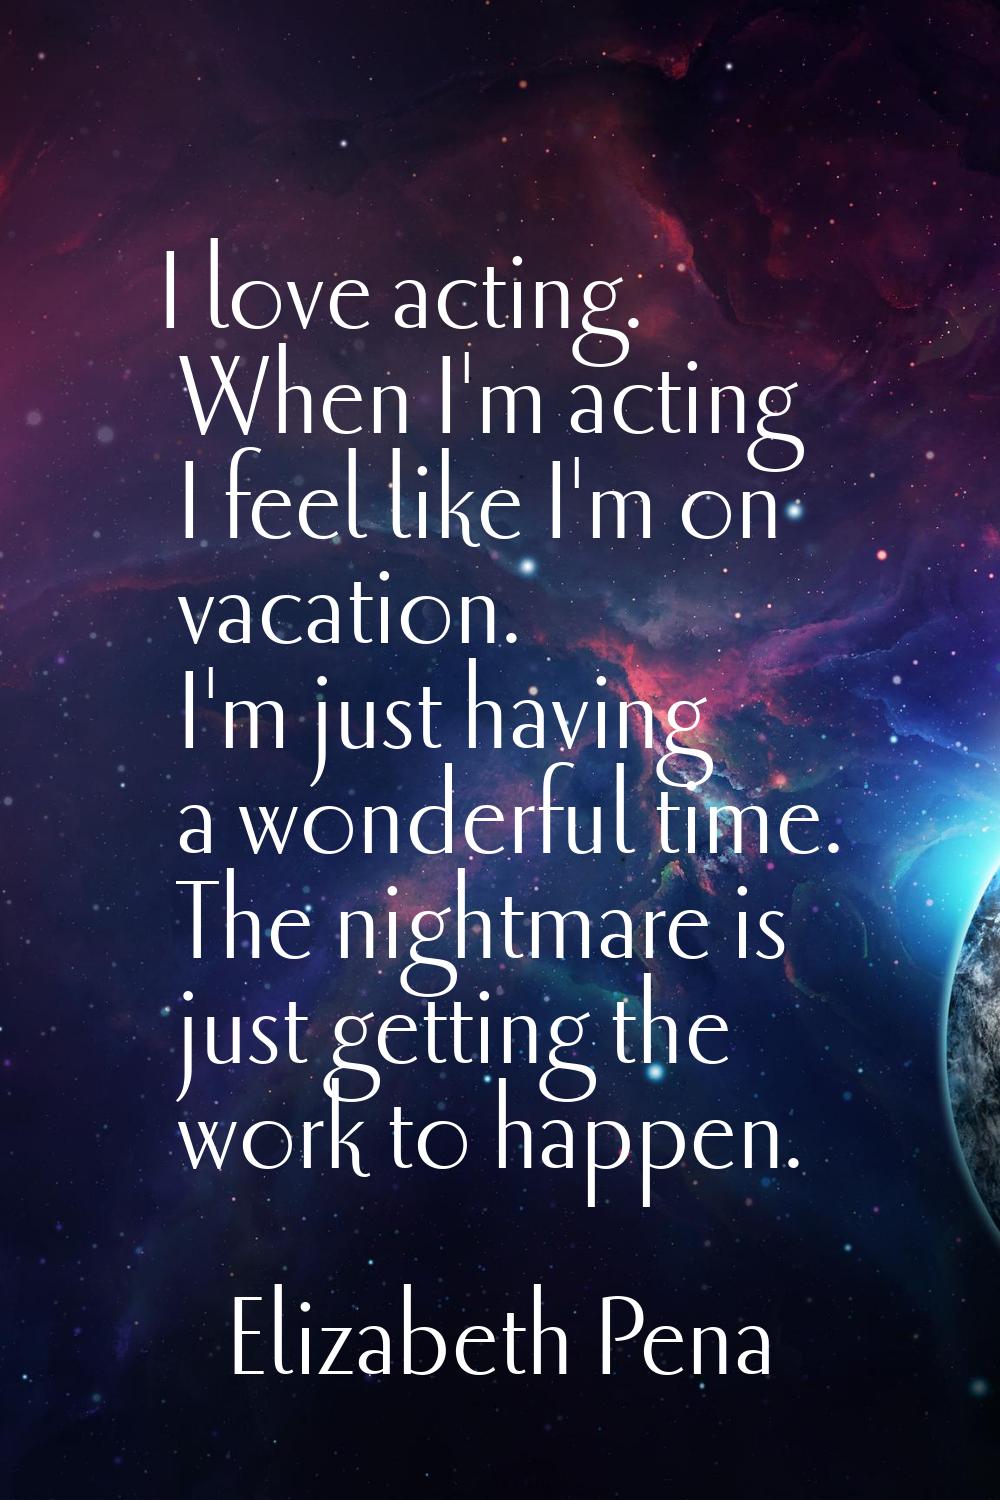 I love acting. When I'm acting I feel like I'm on vacation. I'm just having a wonderful time. The n